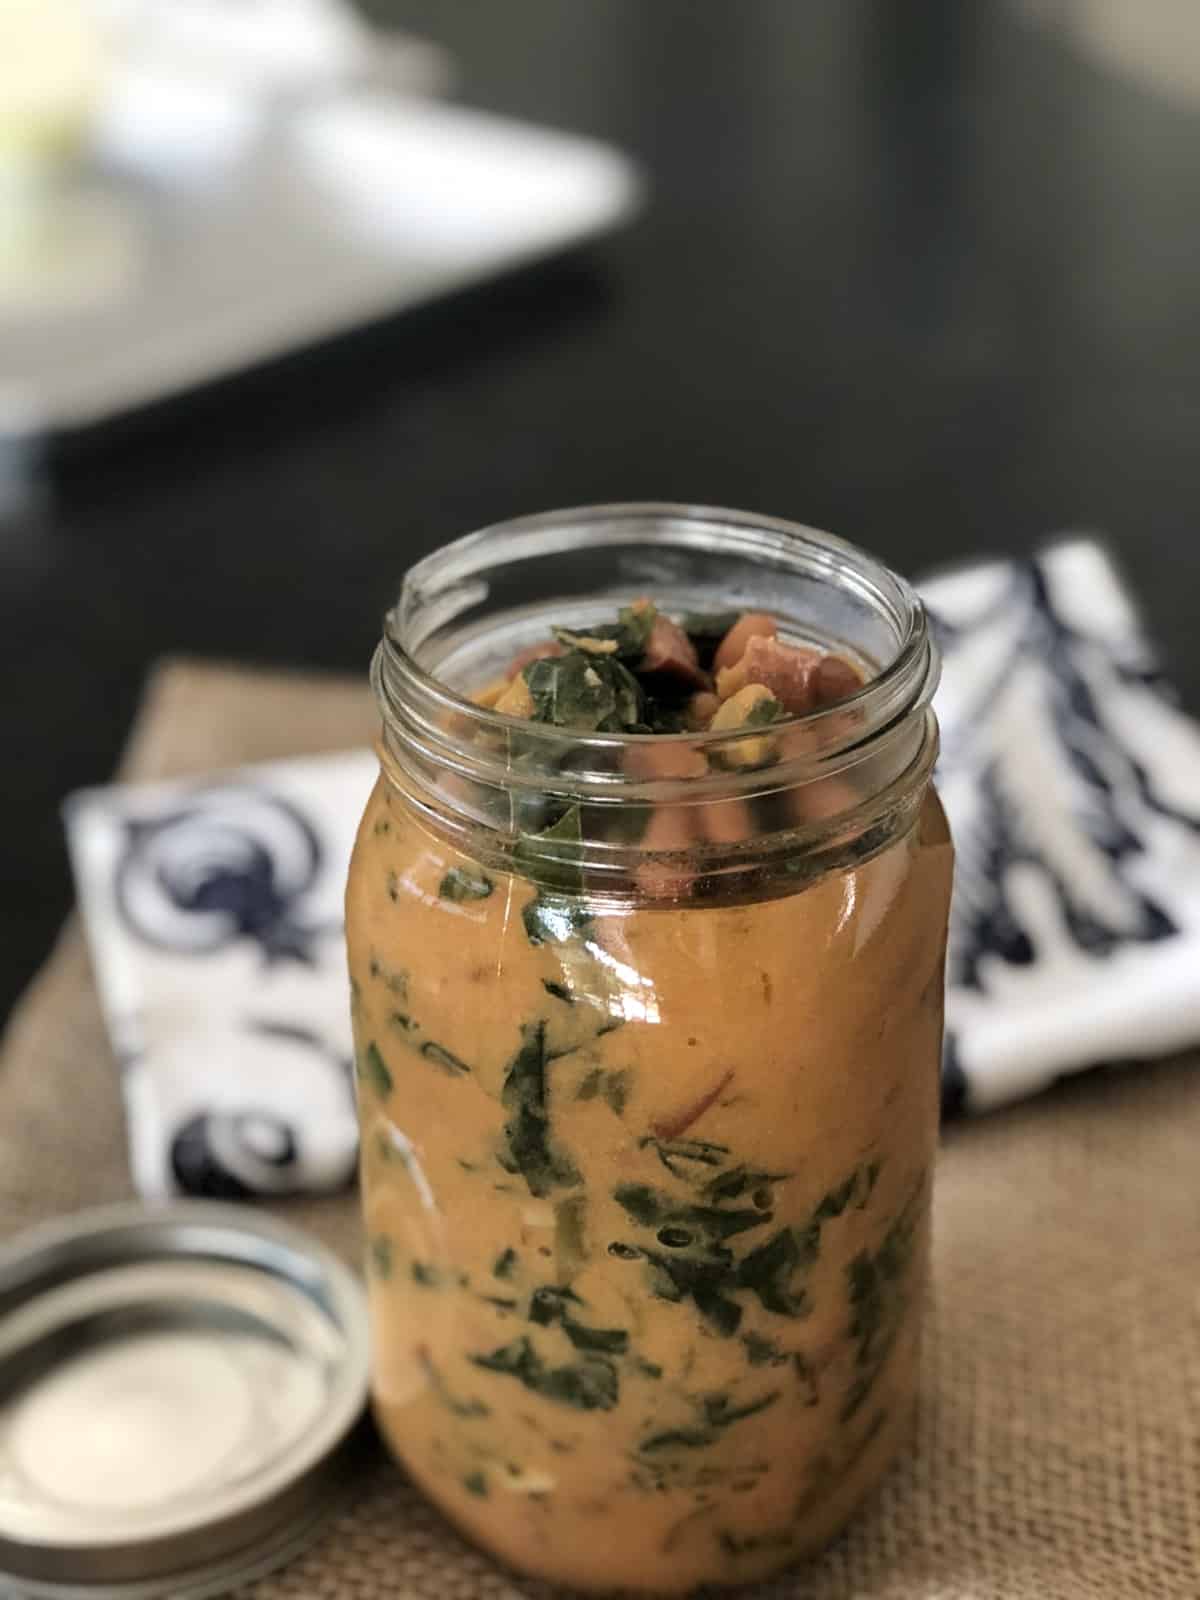 Mason jar filled with Southern Bean Soup on burlap mat on kitchen counter.